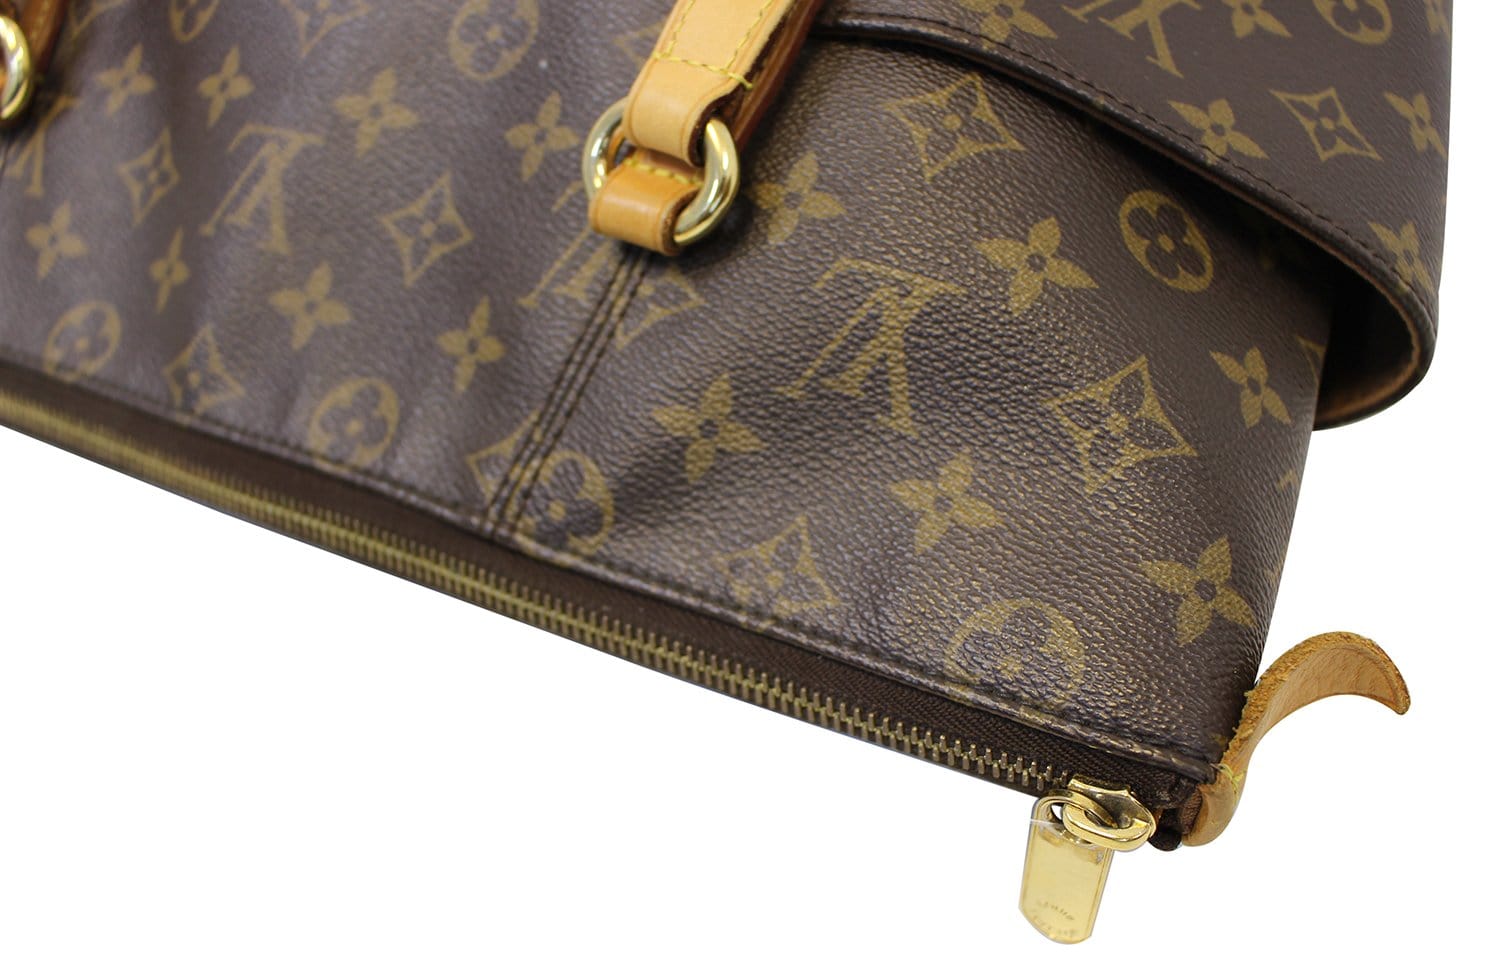 LOUIS VUITTON Shoulder Bag used Monogram Canvas Totally MM Brown